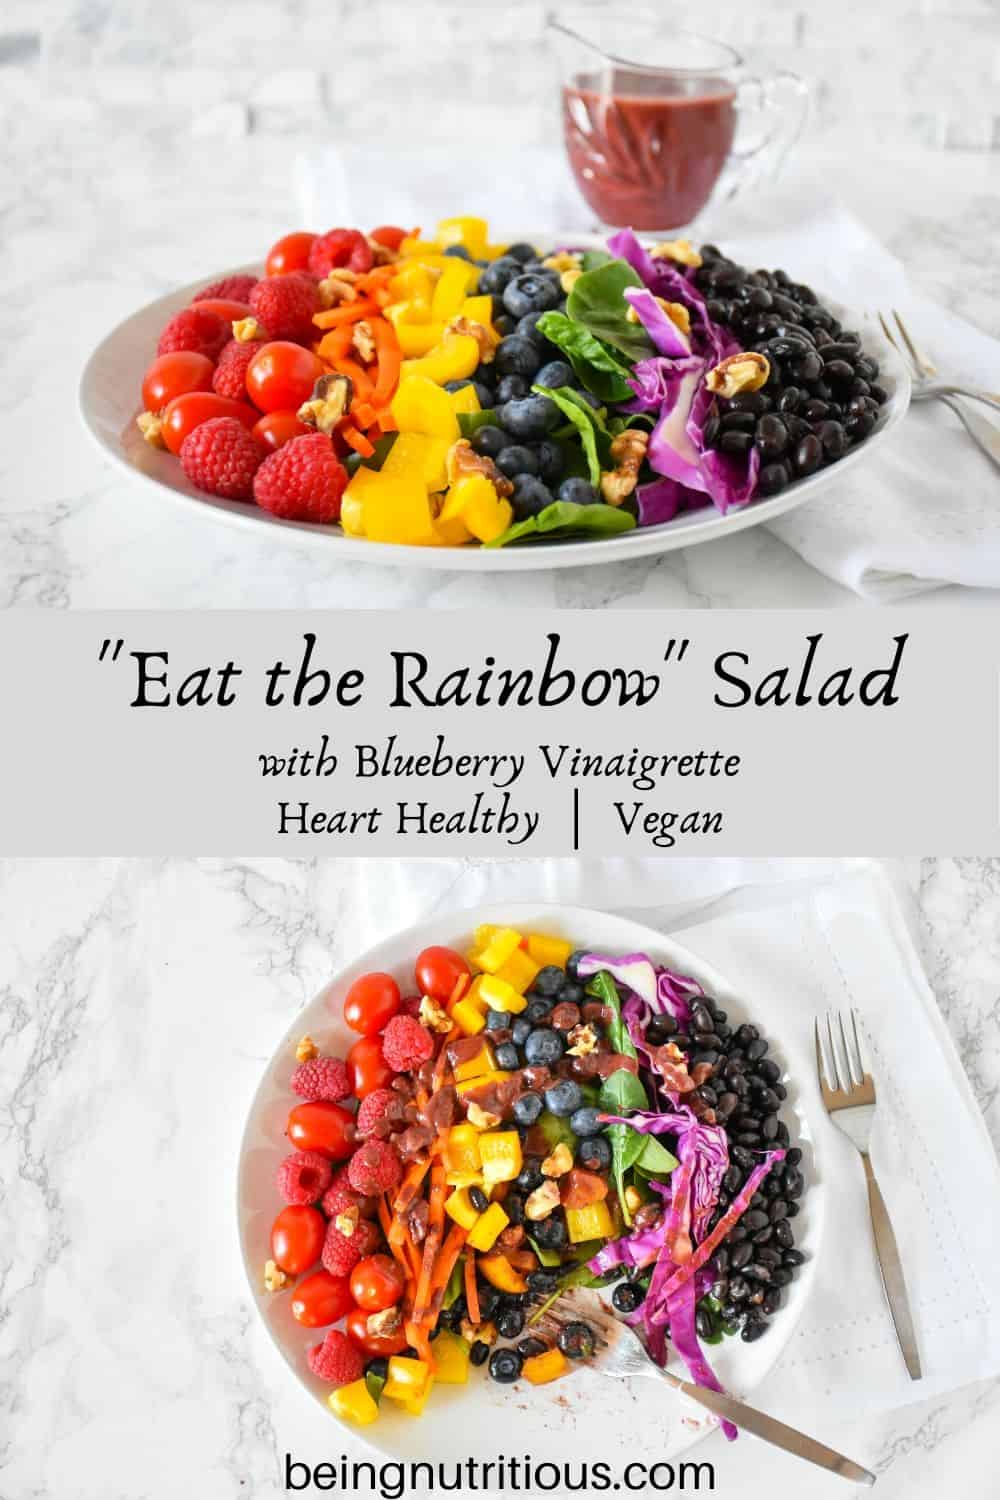 Stacked image. Top image is of rainbow salad on a plate, ingredients arranged by color. Bottom image is and overhead of rainbow salad on a plate, with blueberry vinaigrette dressing poured on, and several bites take from salad.